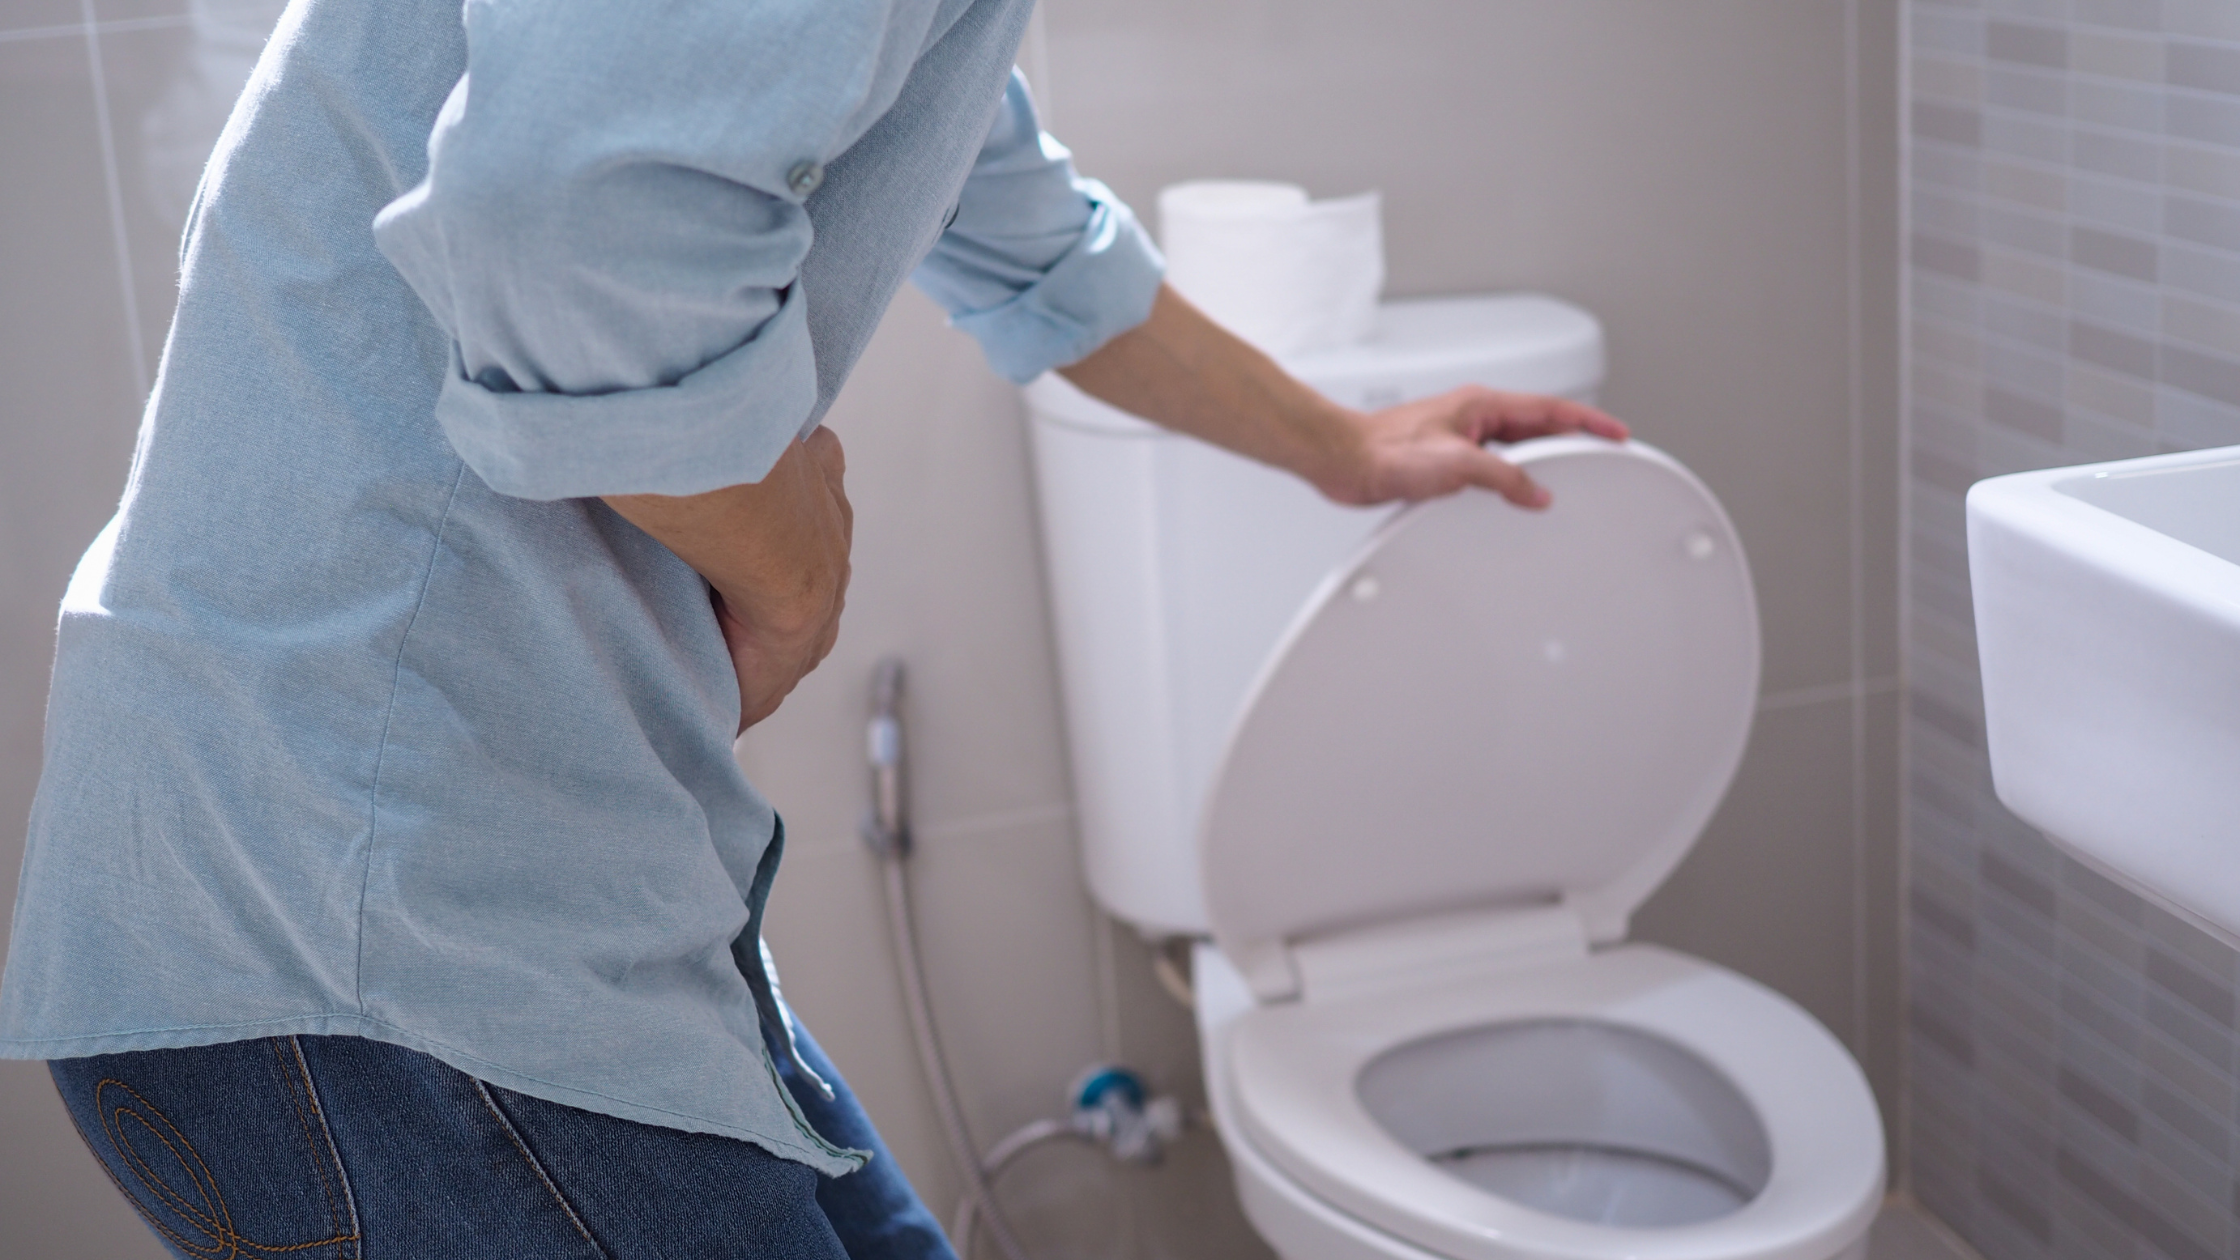 person clutching their lower abdomen as they open the toilet lid